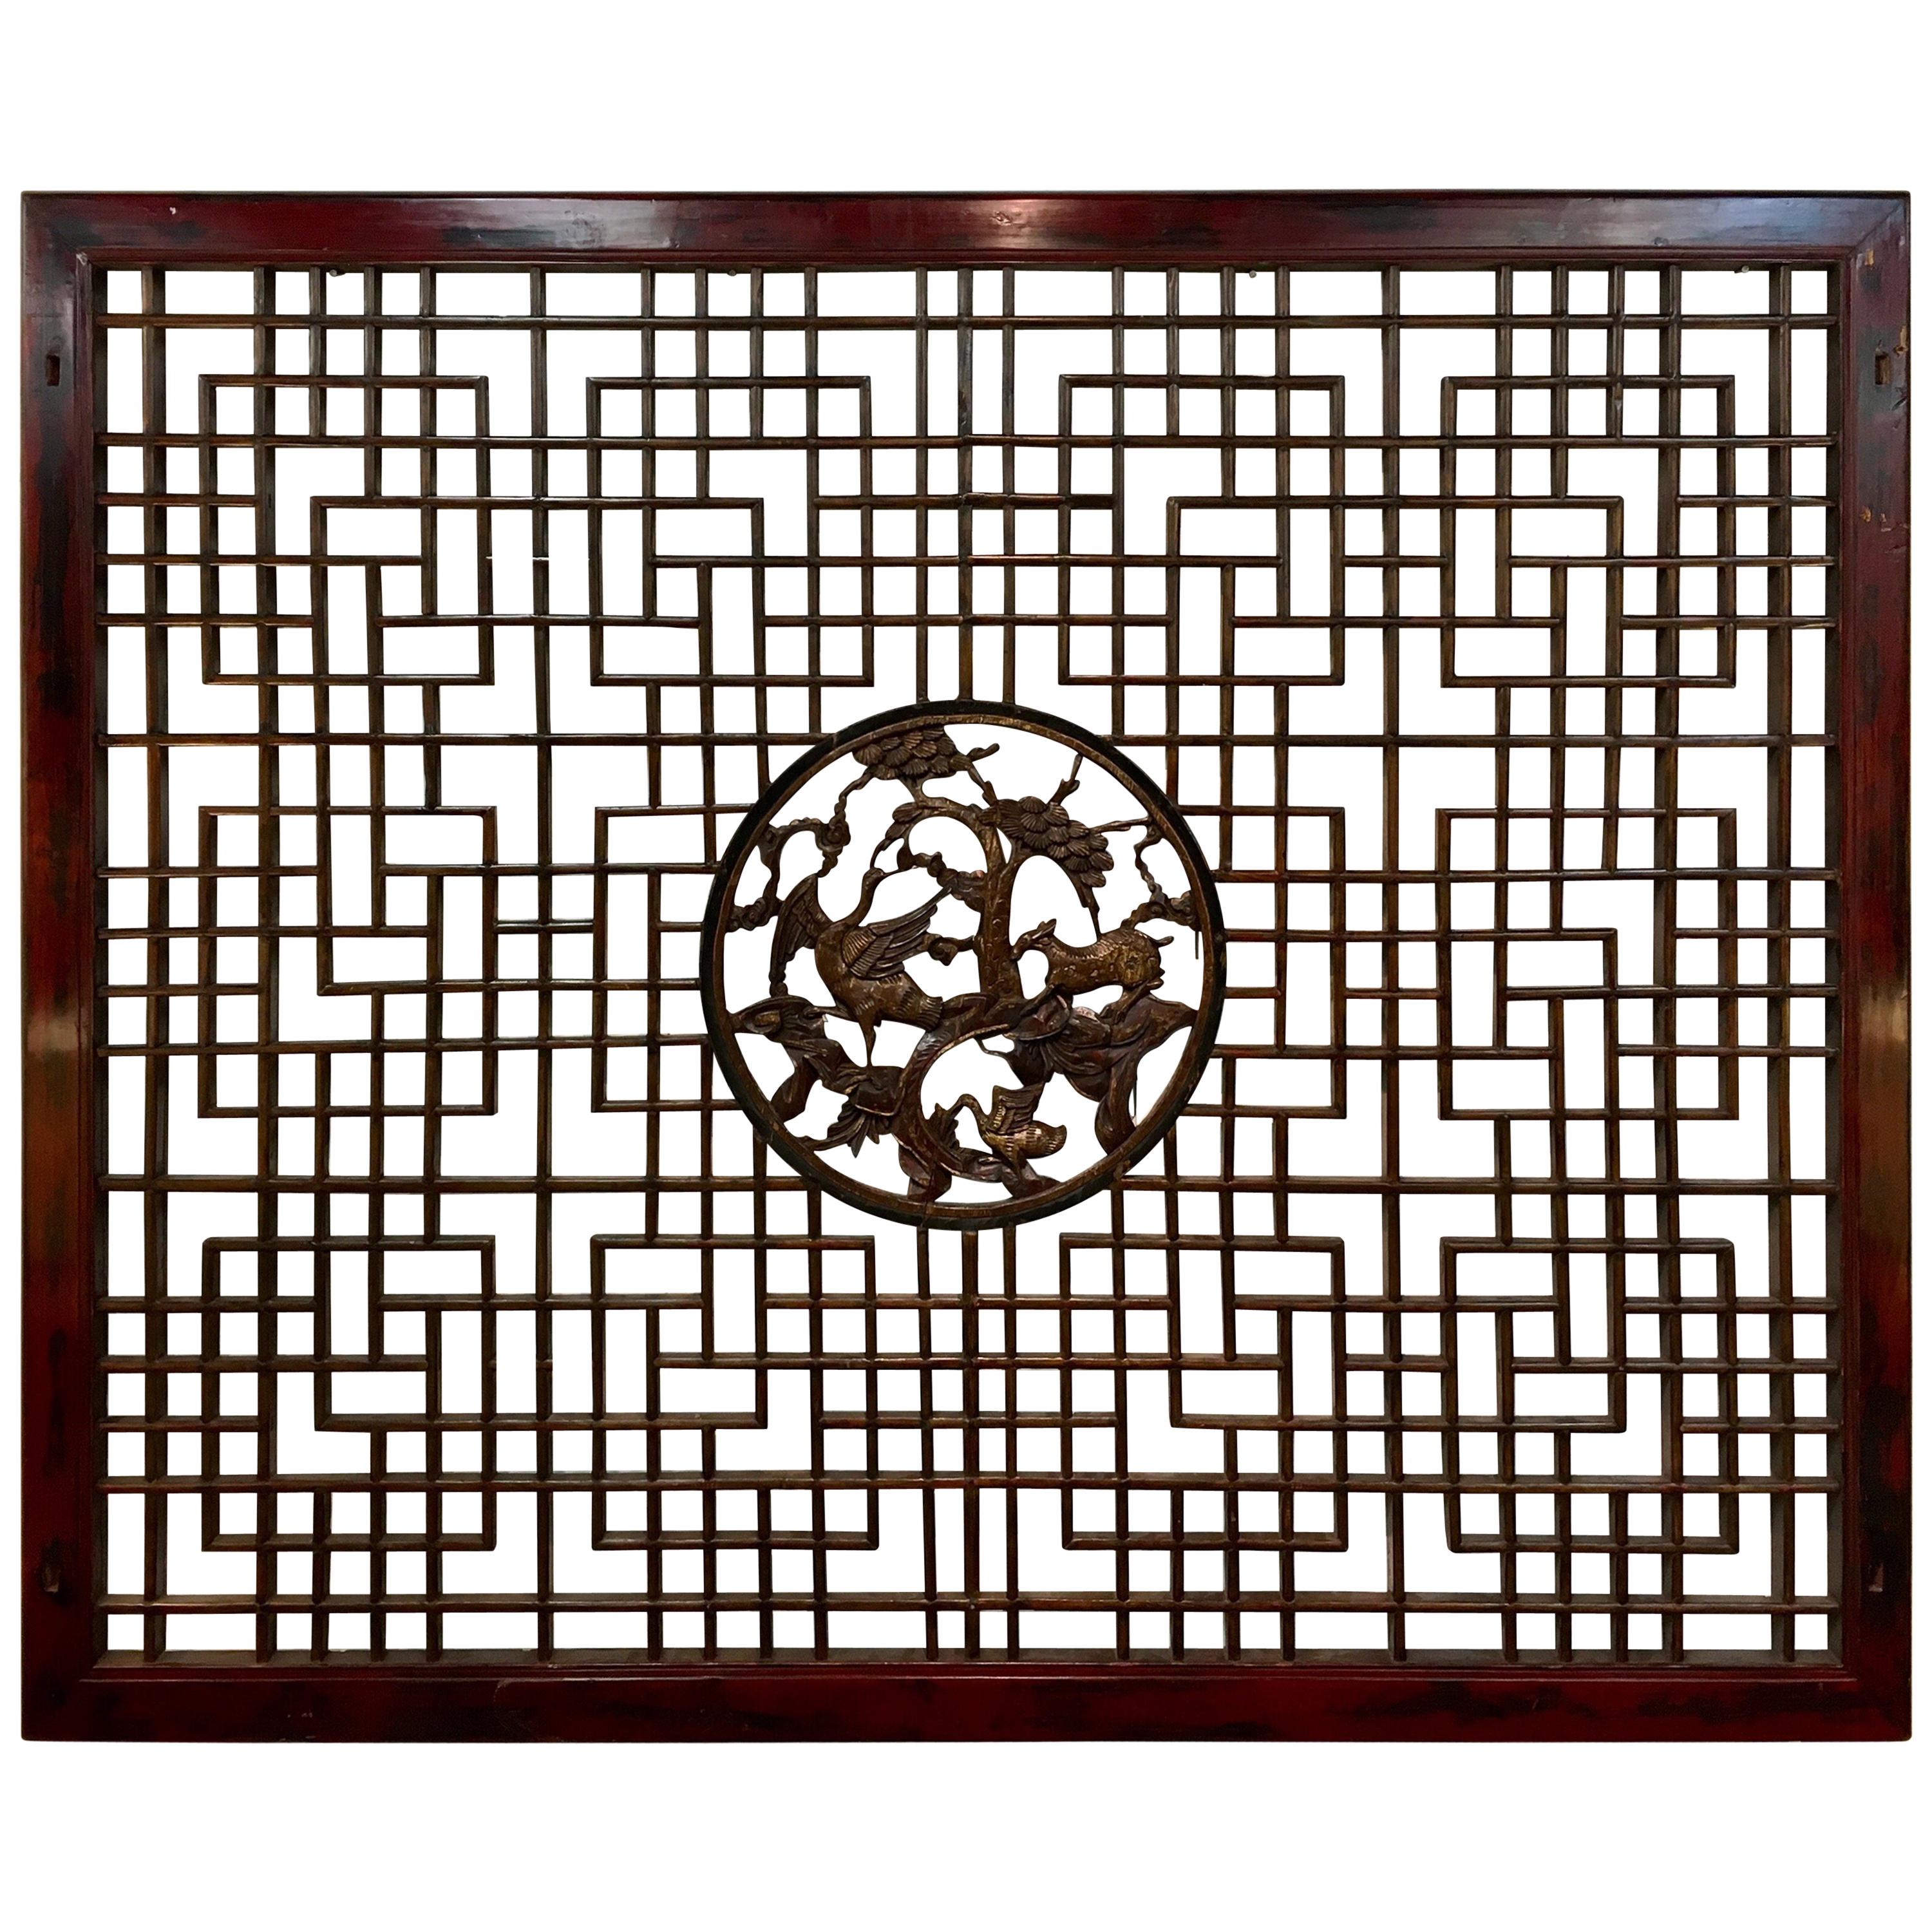 Asian Chinese Carved Mahogany Lattice Wall Sculpture Screen Panel Open Fretwork